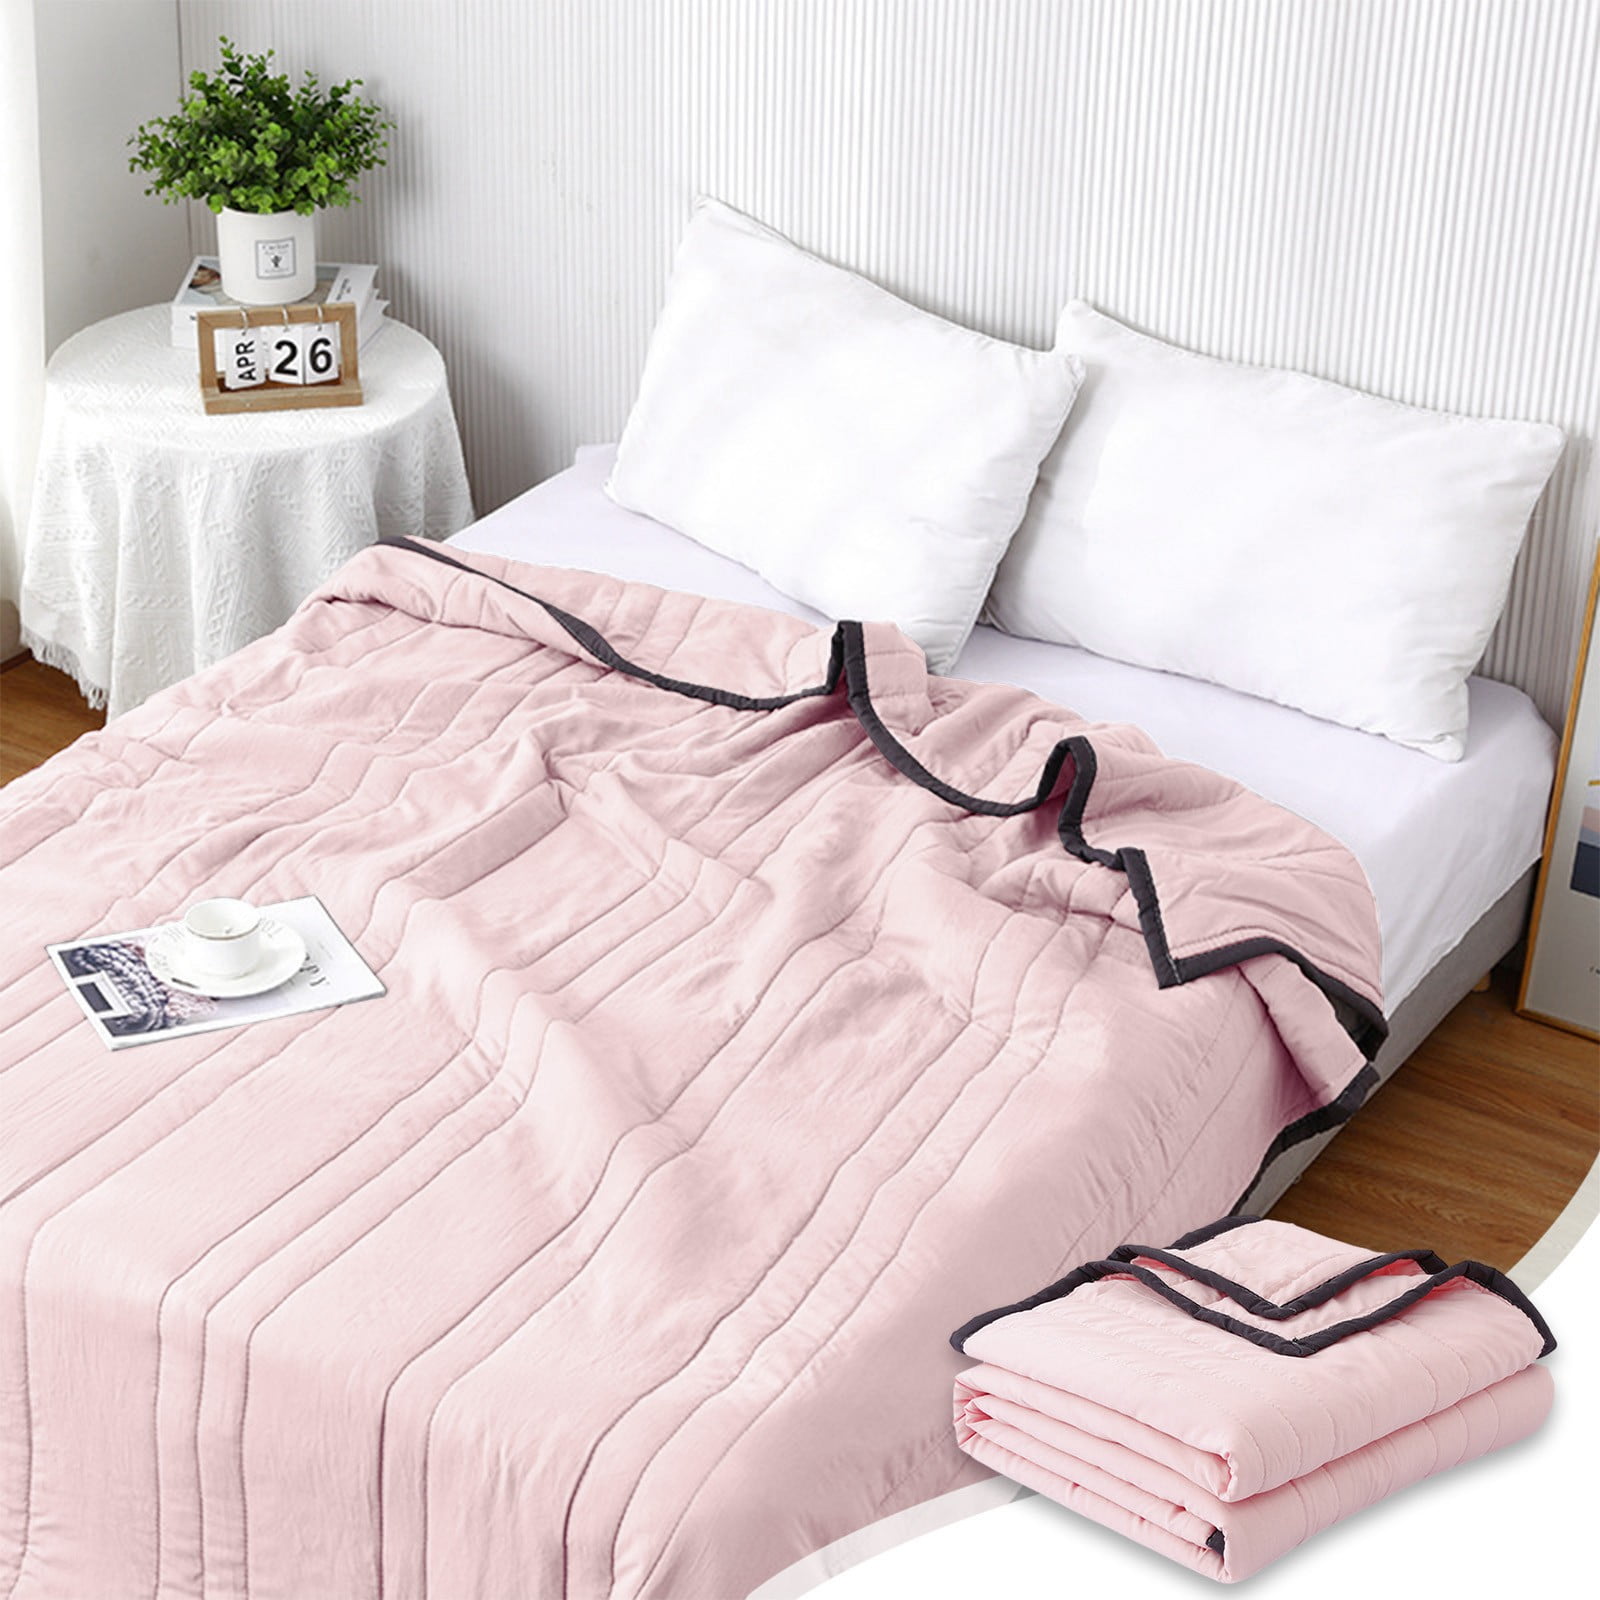 Sokhug Clearance Summer Cooler Quilt For Hot Sleepers And Night Sweats ...